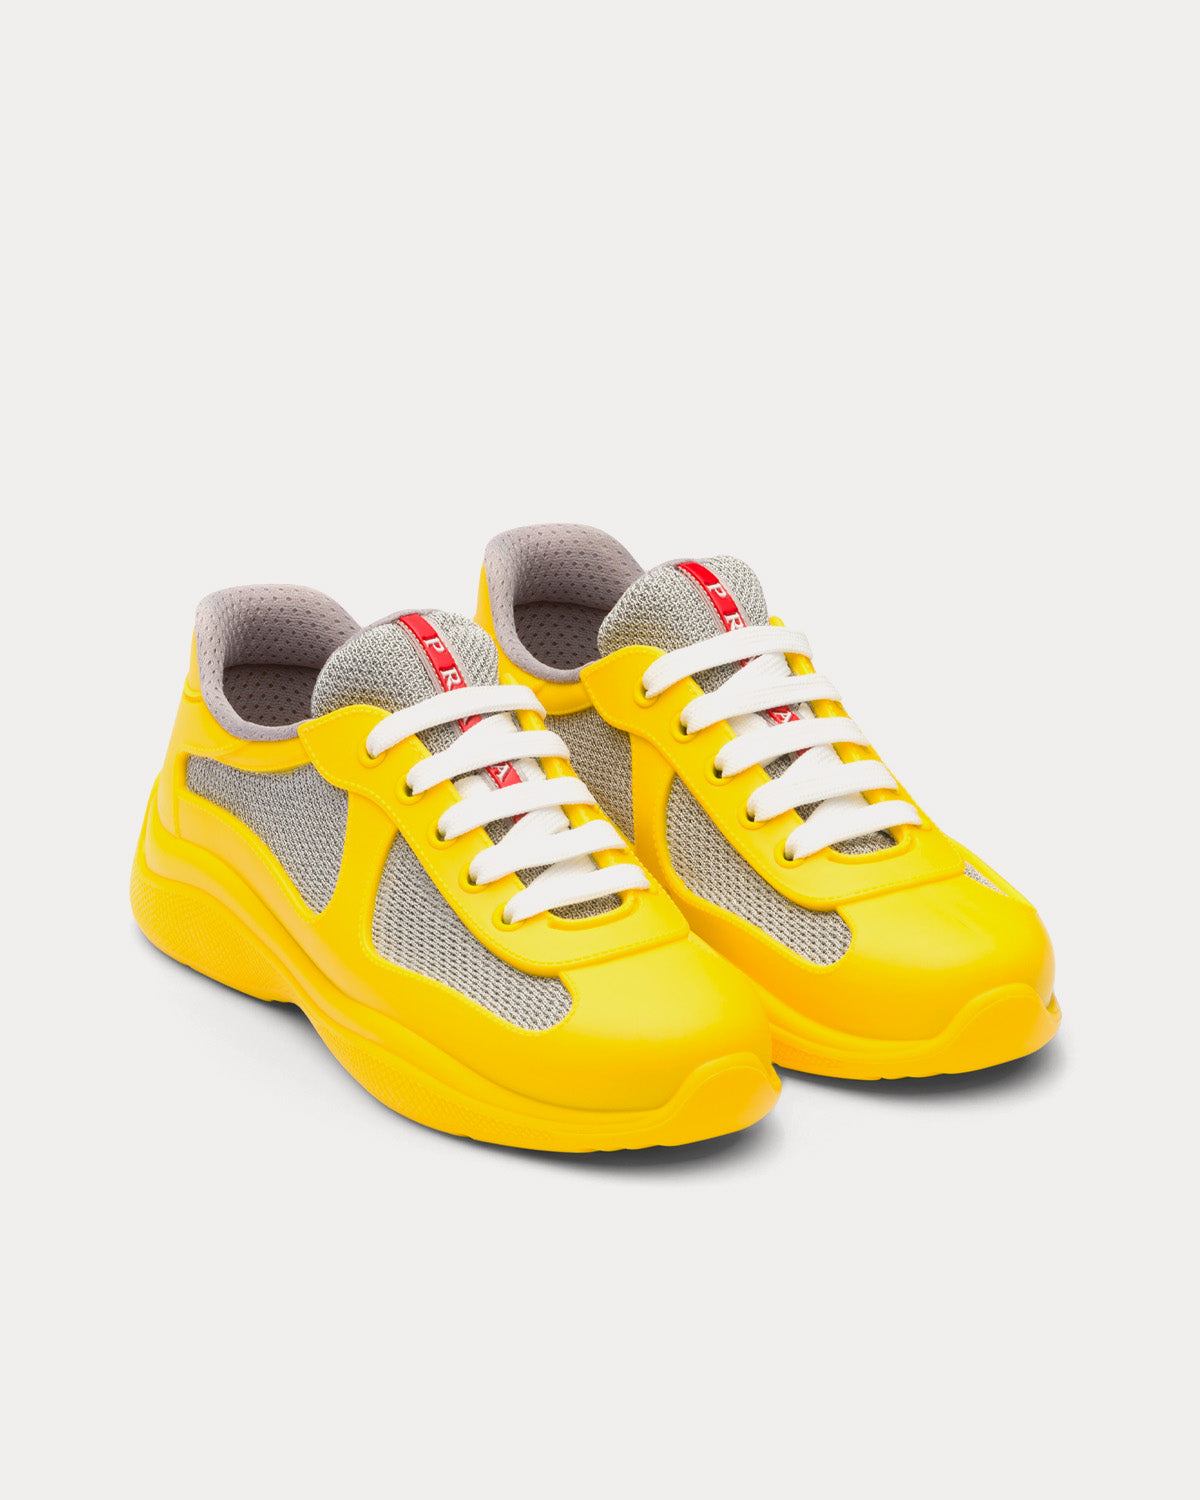 Prada - America's Cup Soft Rubber & Bike Fabric Sunny Yellow Low Top Sneakers